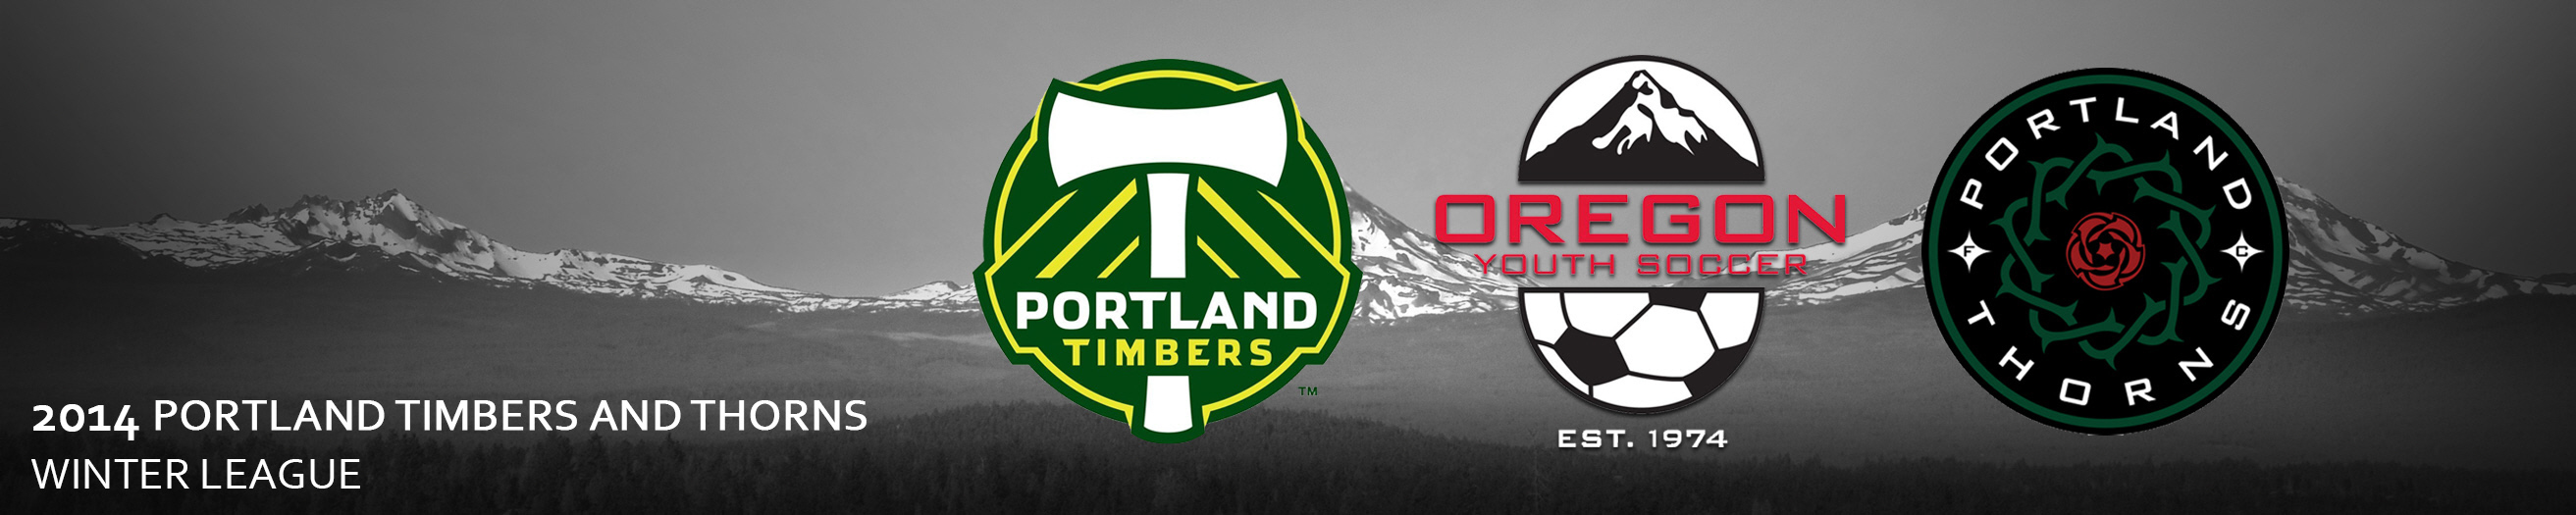 2014 Portland Timbers and Thorns Winter League banner